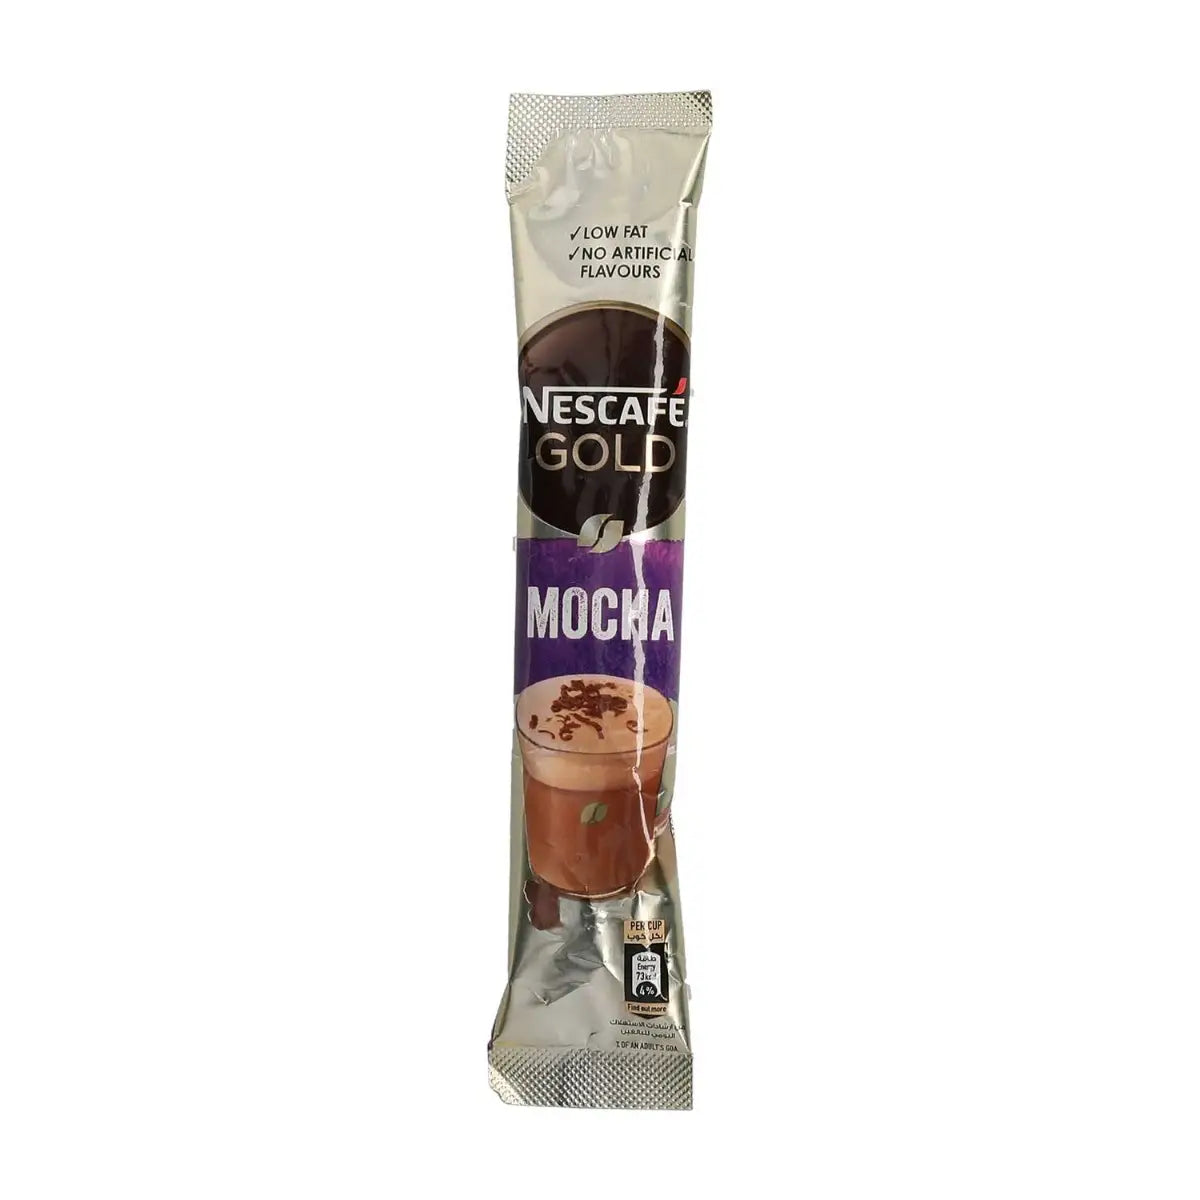 Nescafe Chocolate 3 in 1 (Pack of 2)